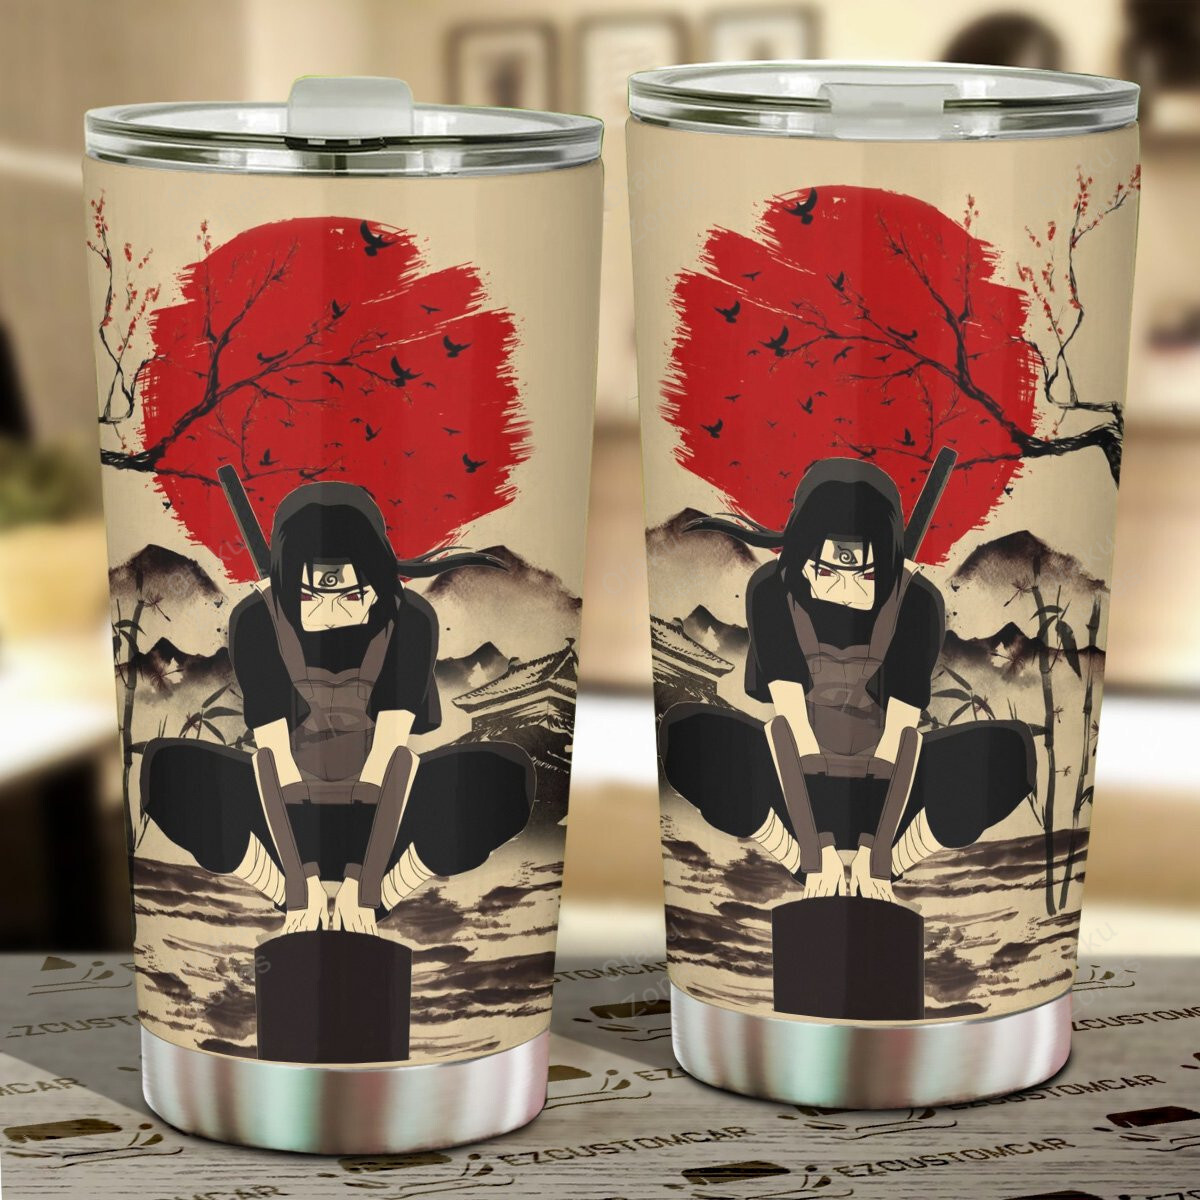 Go ahead and order your new tumbler now! 25